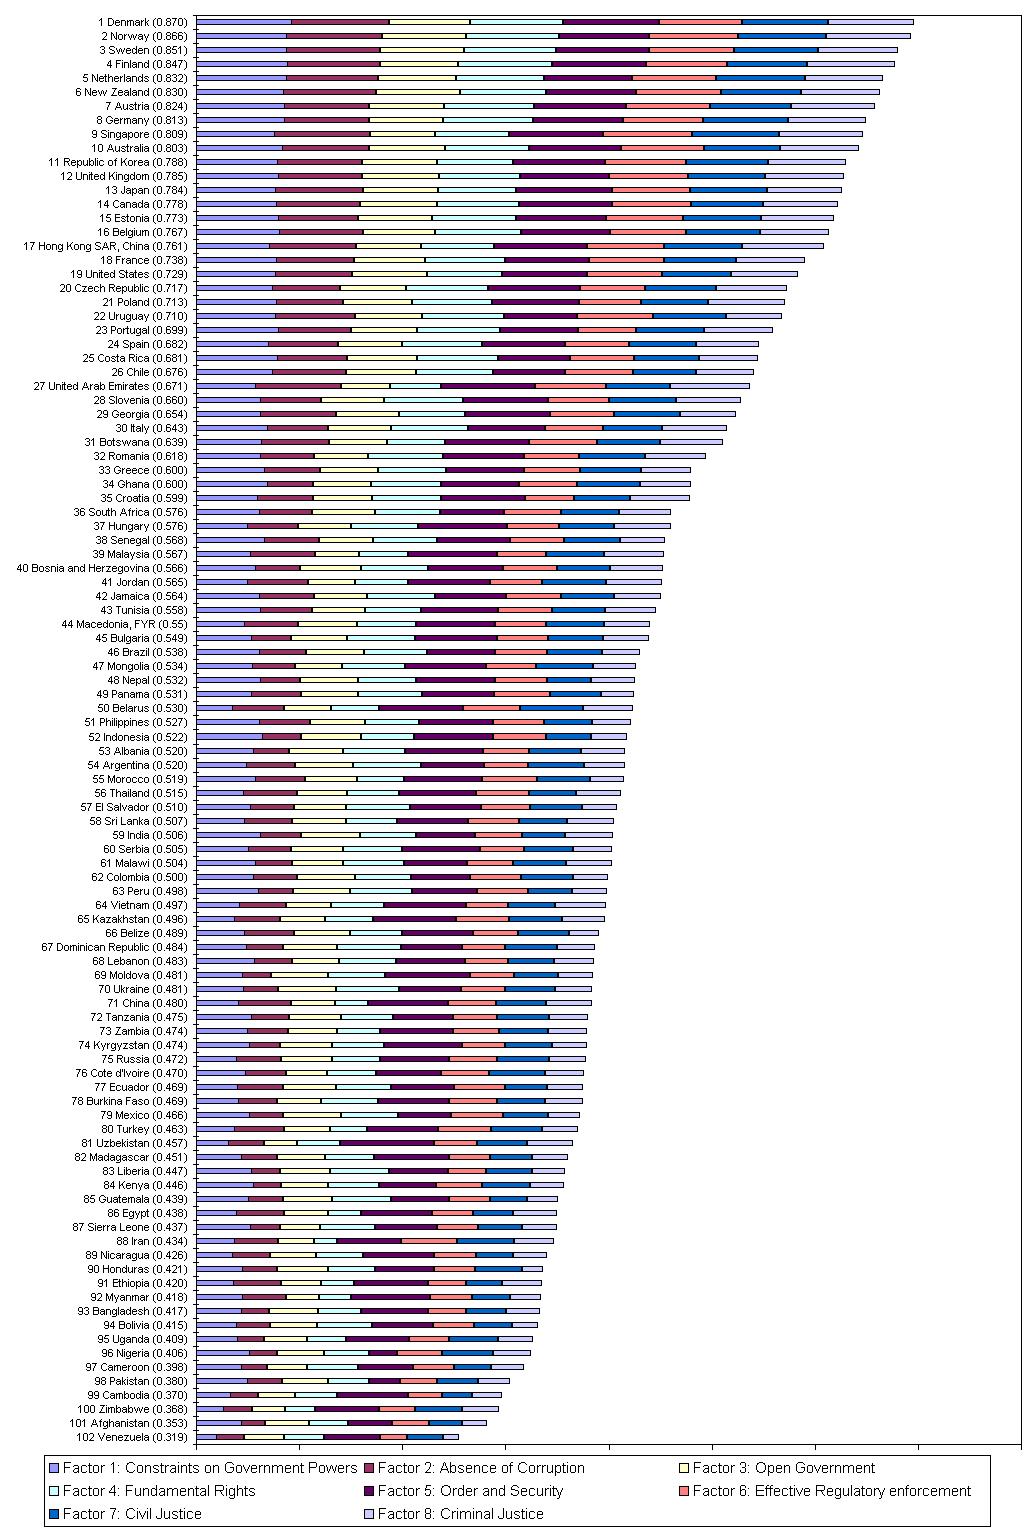 The WJP Rule of Law Index 2015